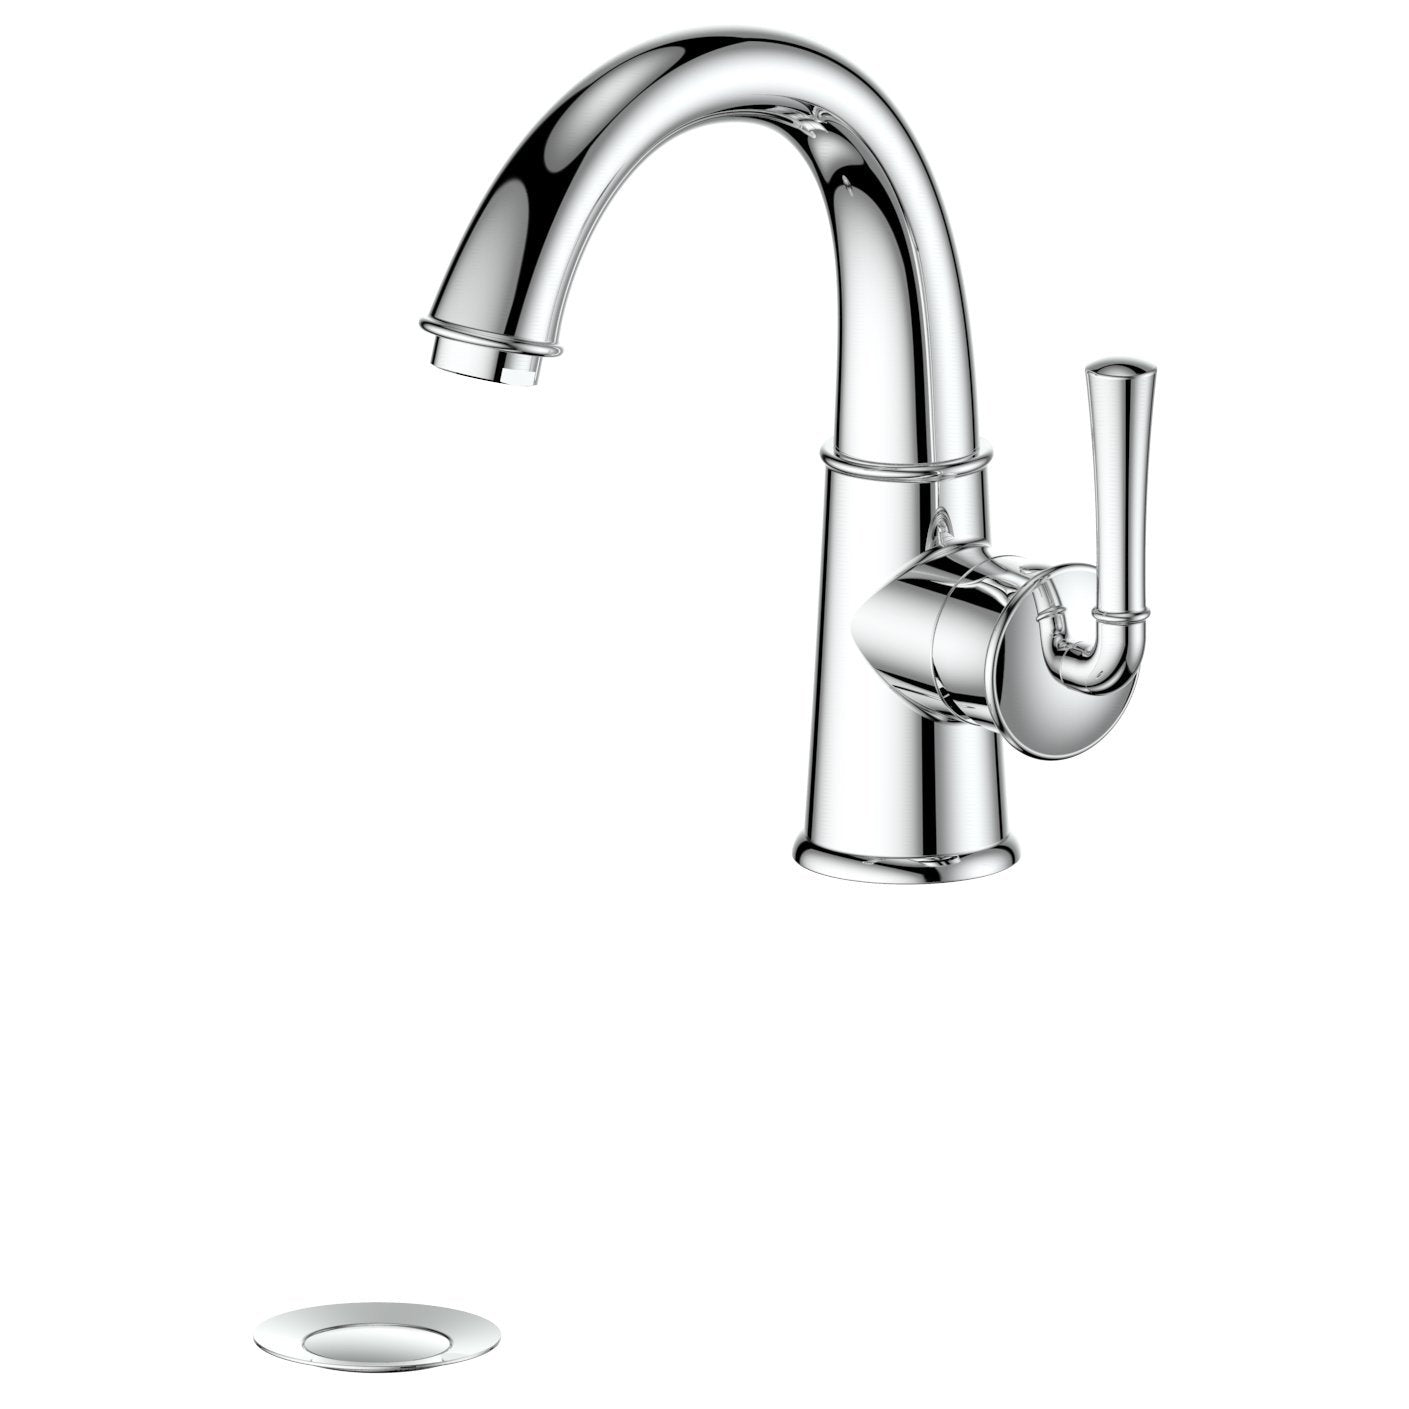 ZLINE Kitchen and Bath, ZLINE Olympic Valley Bath Faucet in Chrome (OLV-BF-CH), OLV-BF-CH,